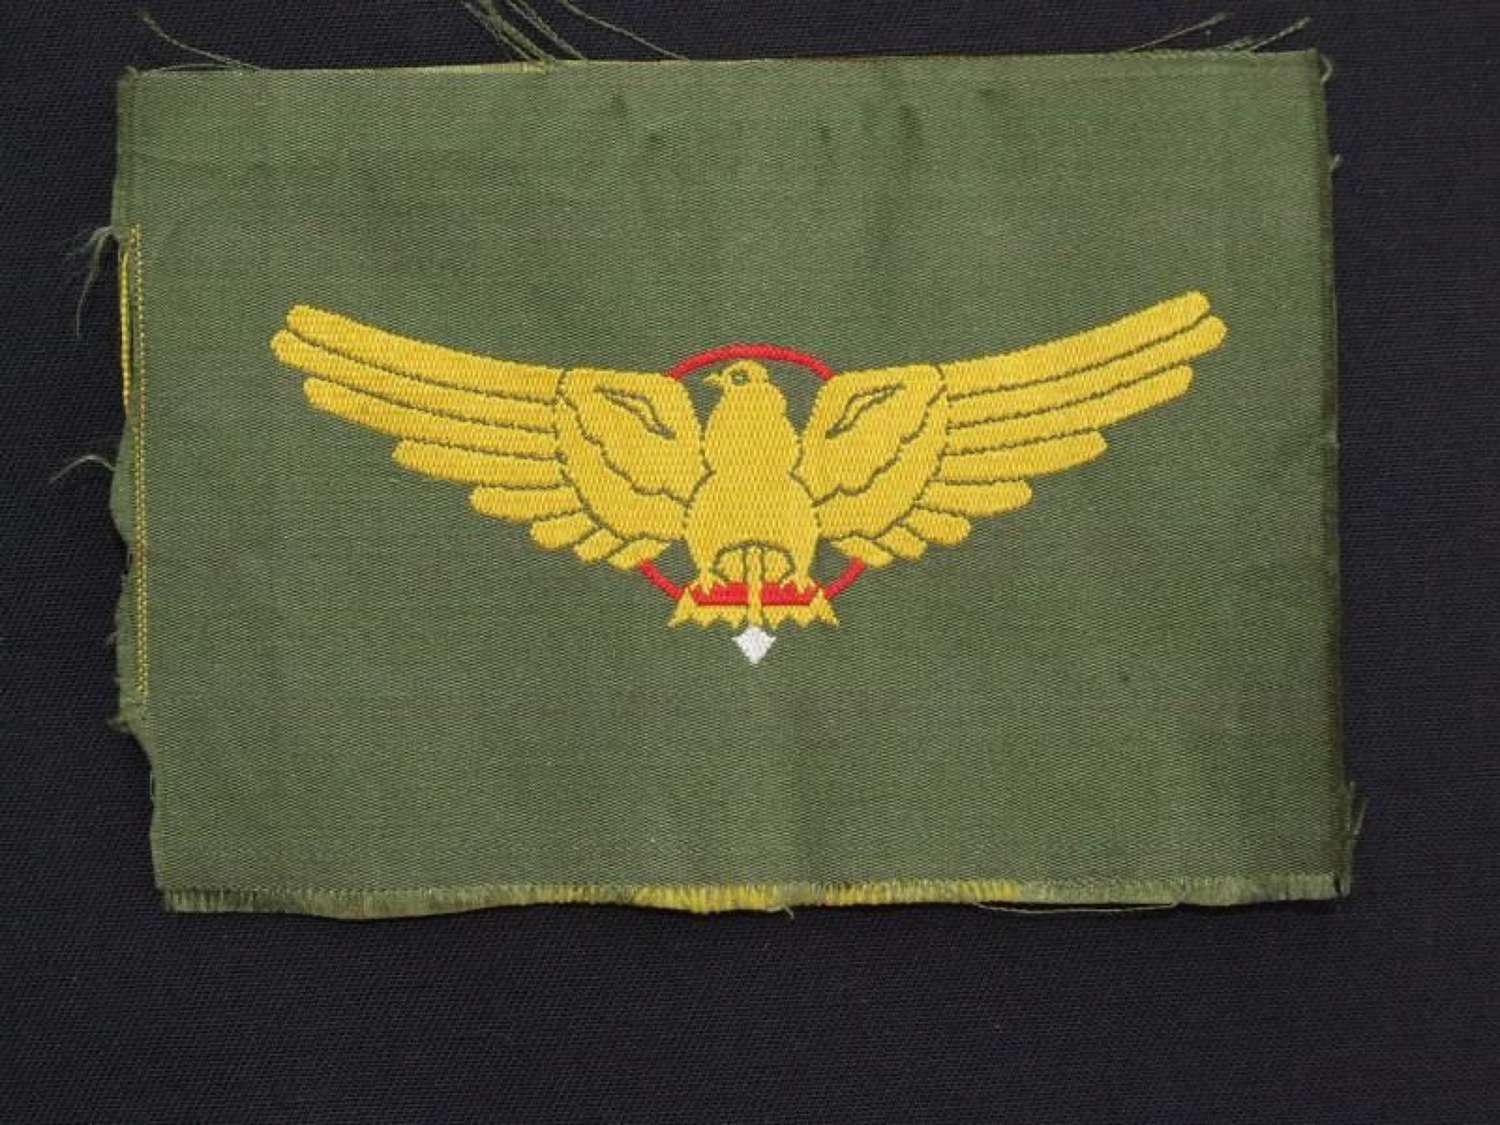 Imperial Japanese Army Paratrooper Badge “ The Golden Kite